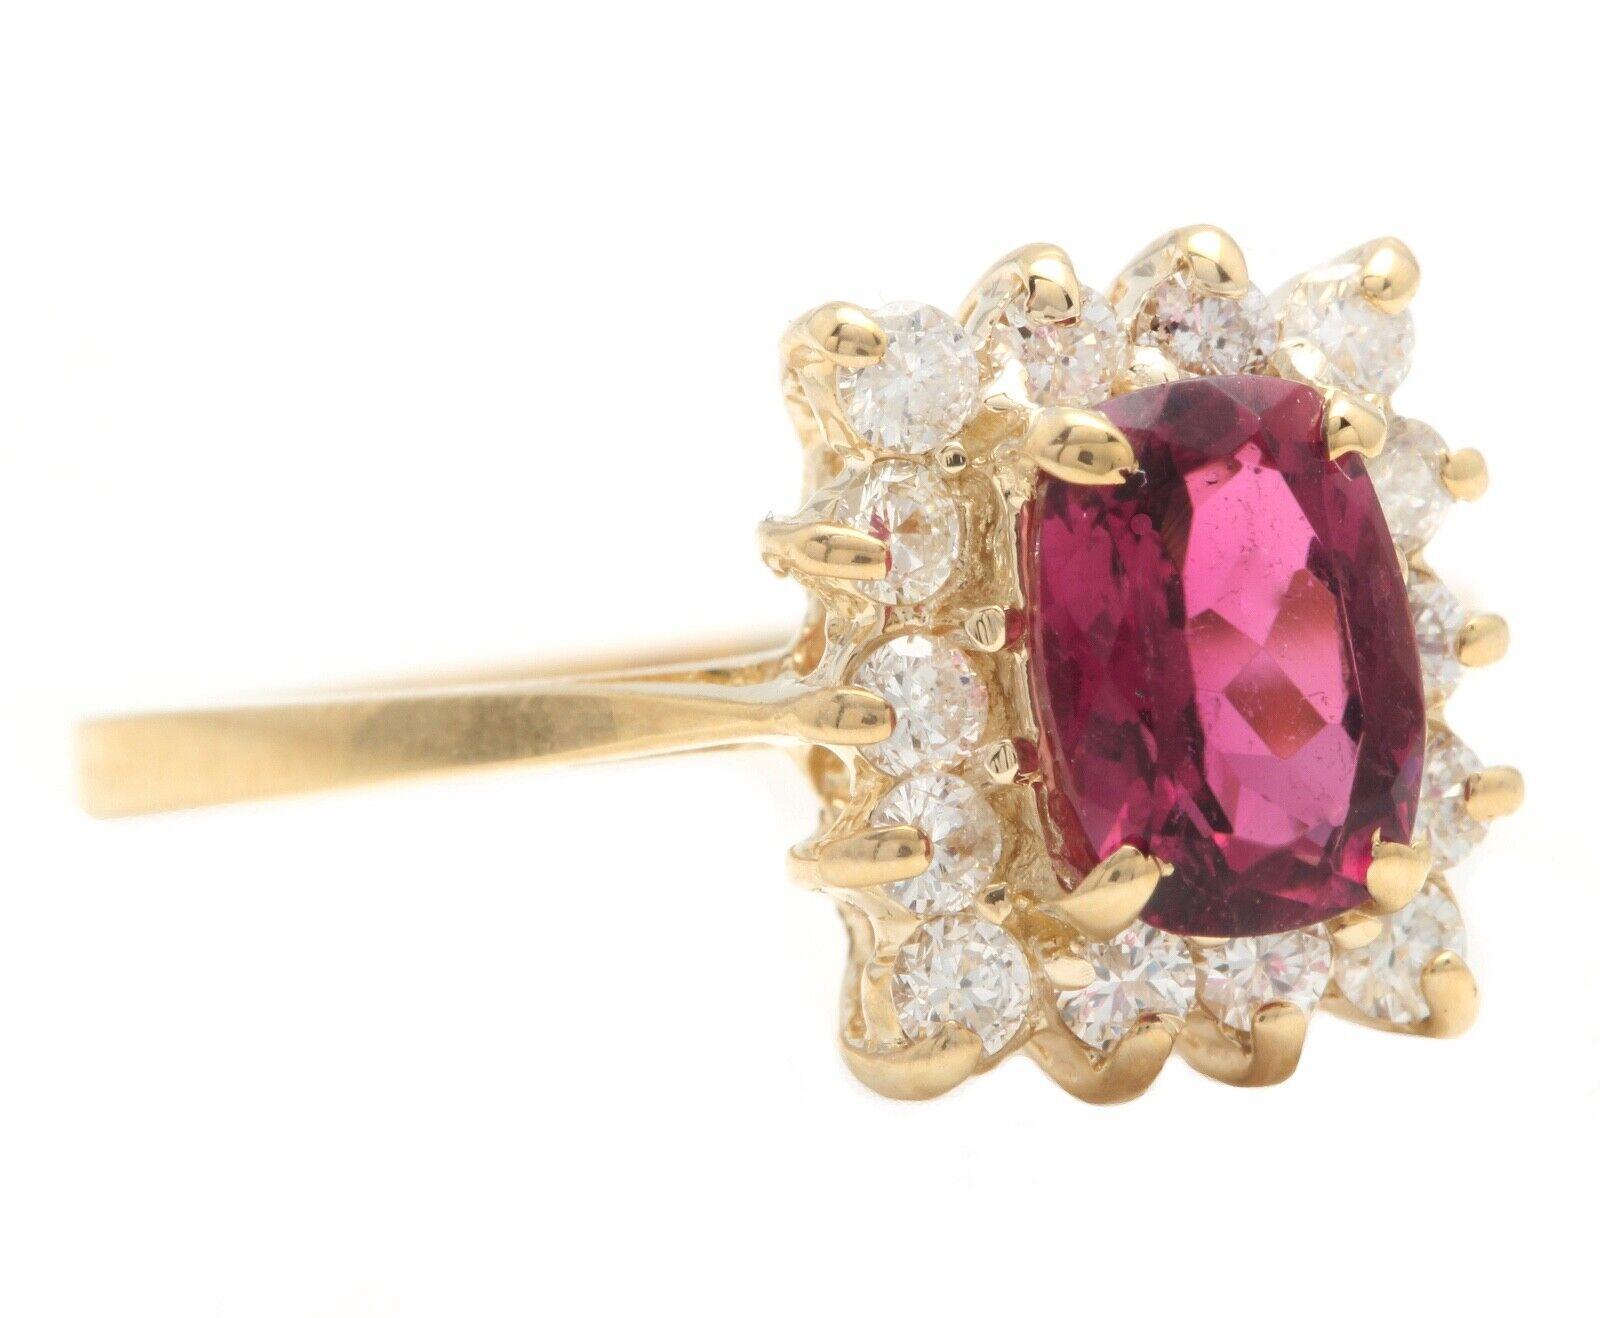 0.75 Carats Natural Very Nice Looking Tourmaline and Diamond 14K Solid Yellow Gold Ring

Suggested Replacement Value:  $3,000.00

Total Natural Cushion Cut Tourmaline Weight is: Approx. 0.50 Carats (Treatment-Heat)

Tourmaline Measures: Approx. 7.00